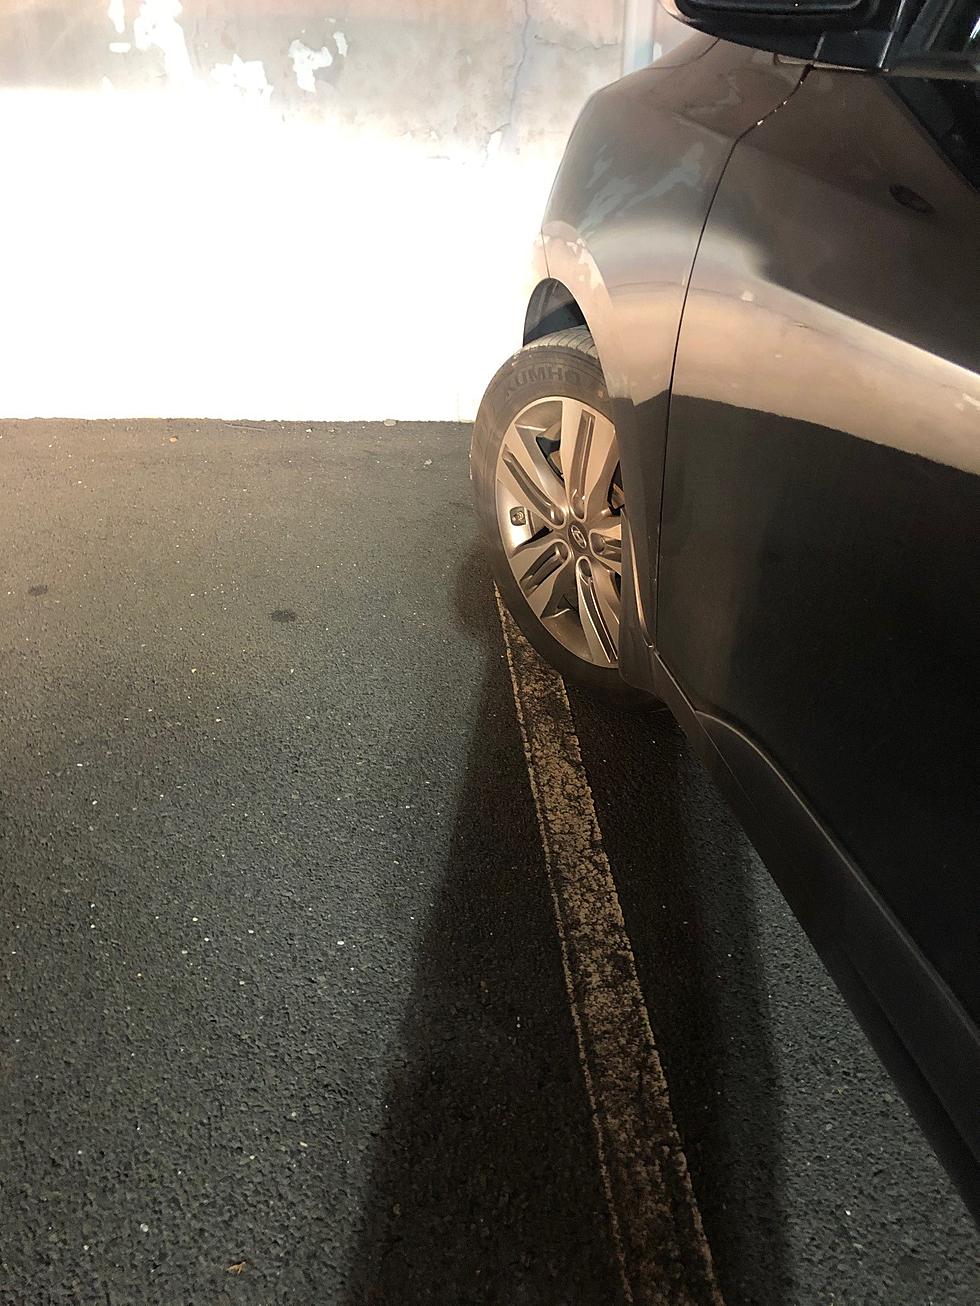 Bad Parking Has Reached The Point Parking Lot